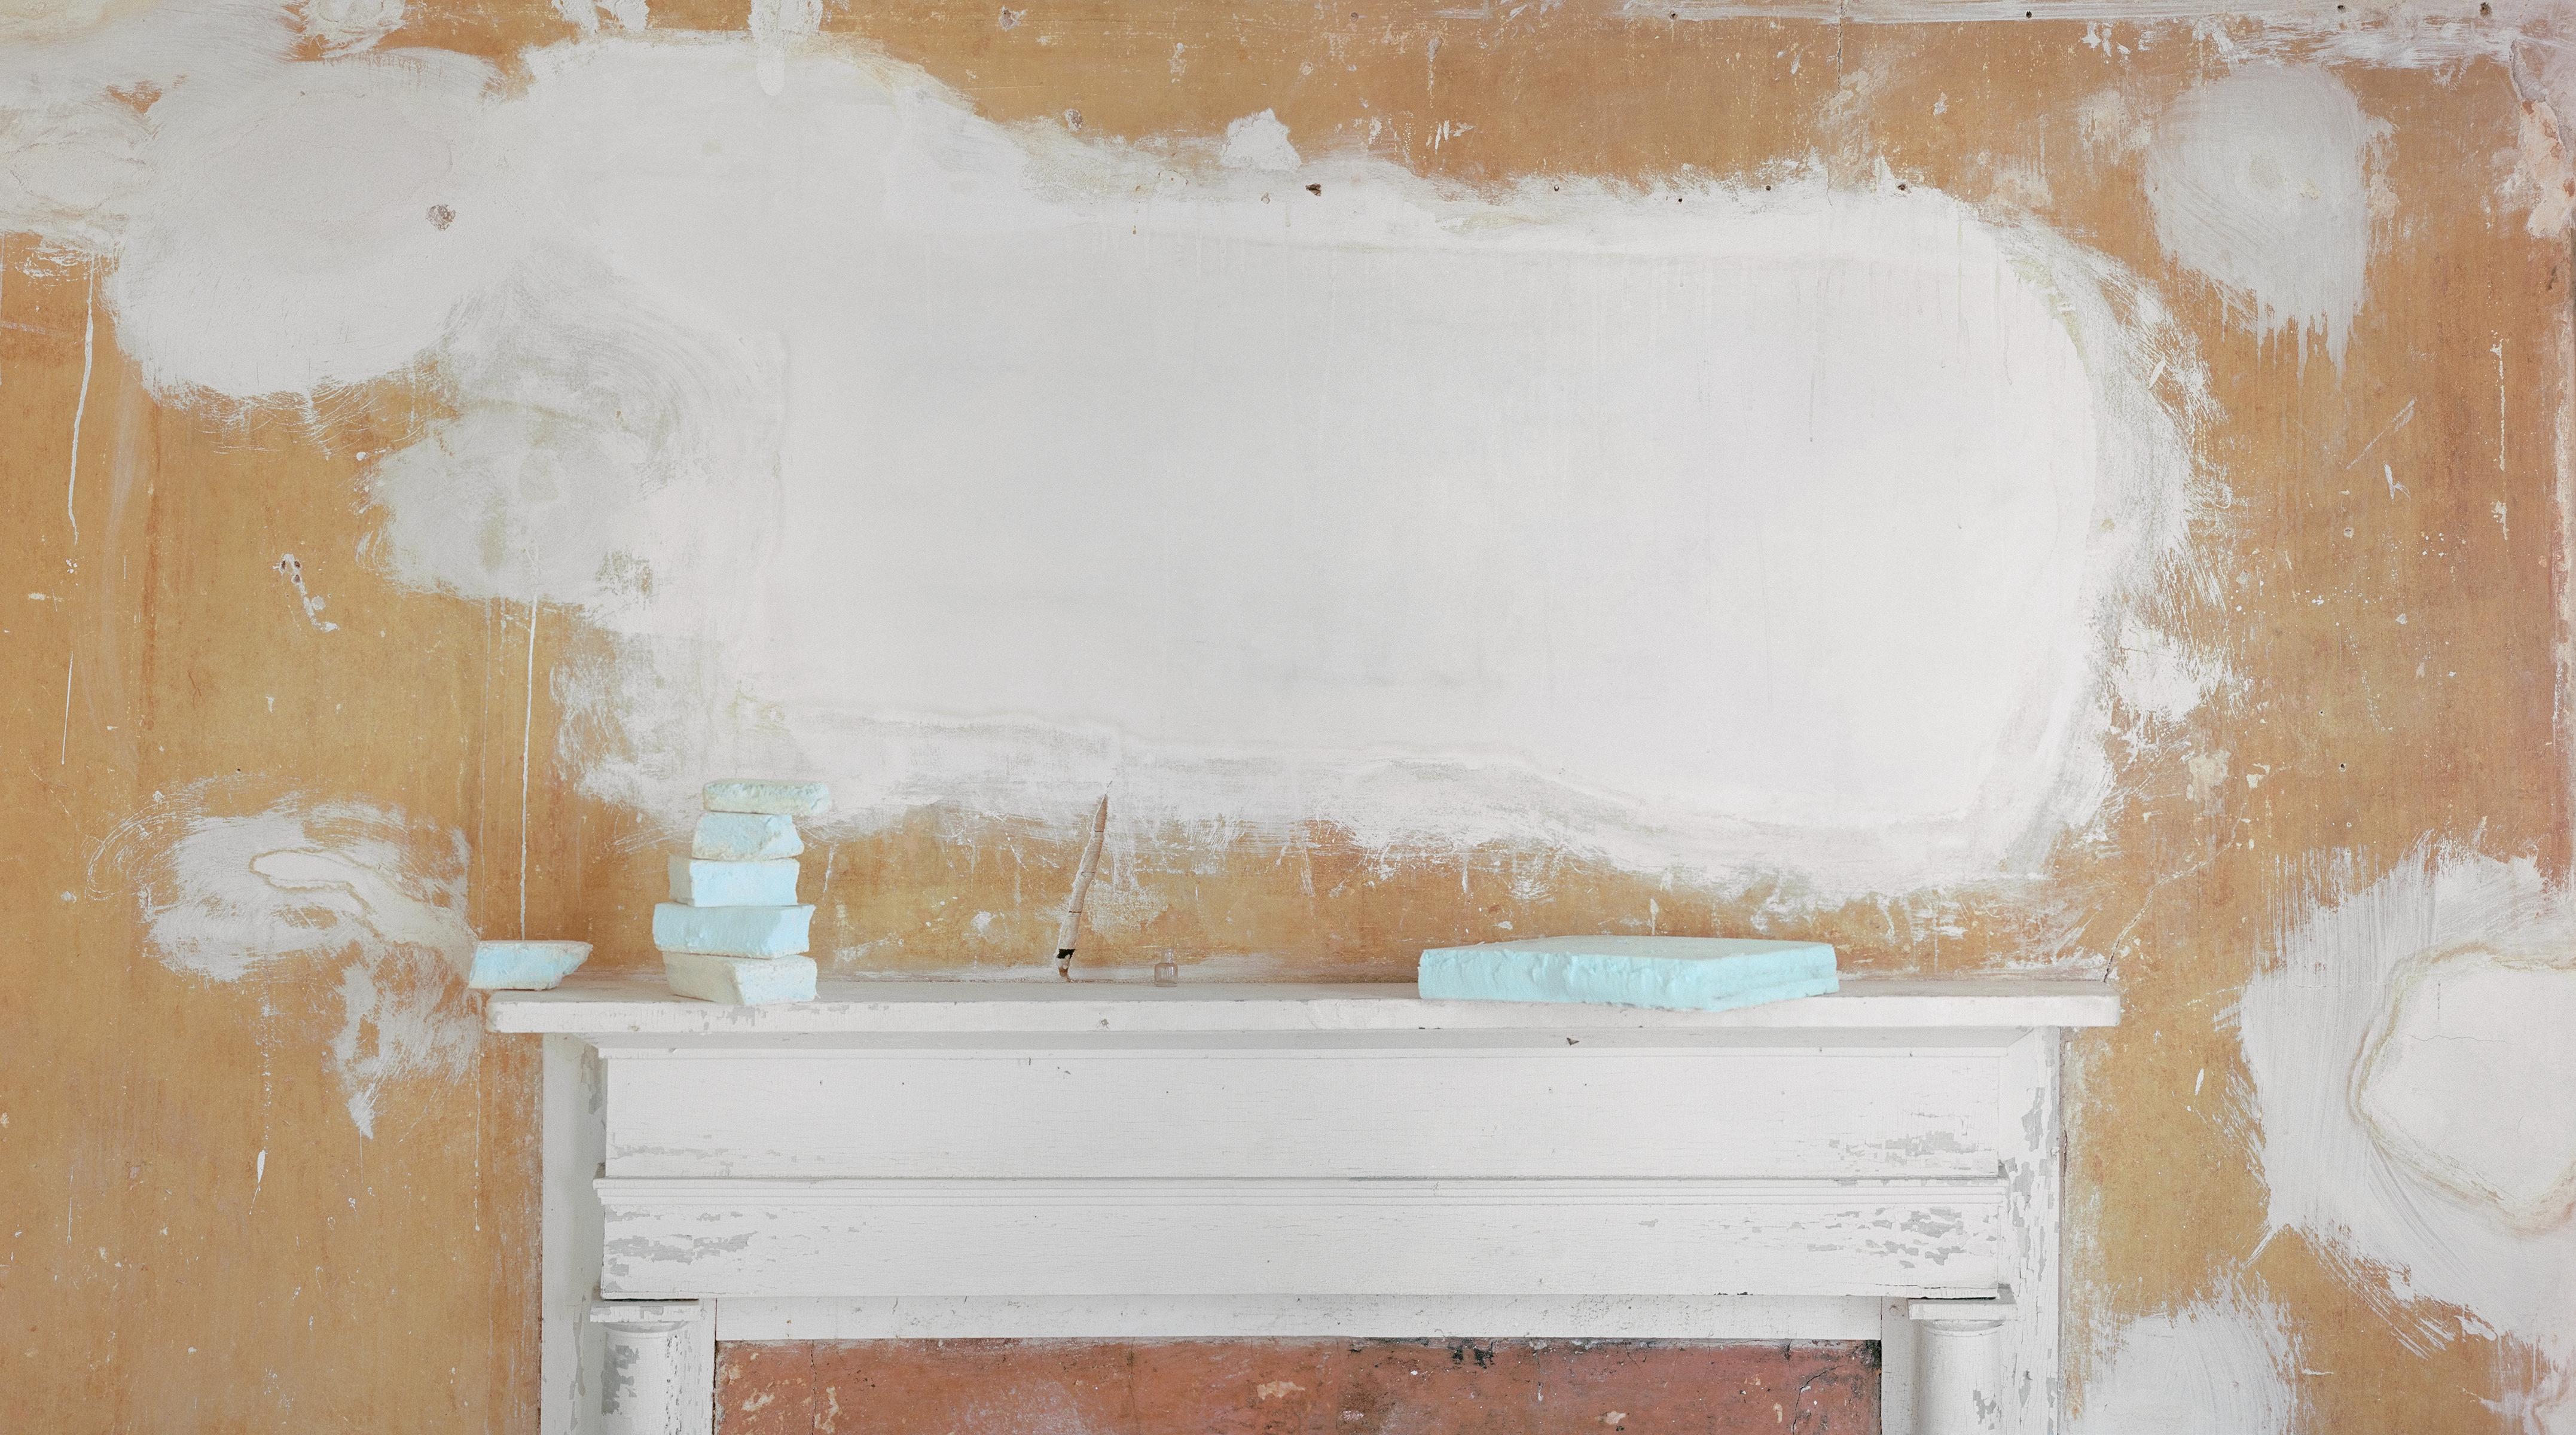 Plaster Clouds (Photograph of an Exposed Wall and Antique Mantle Piece)